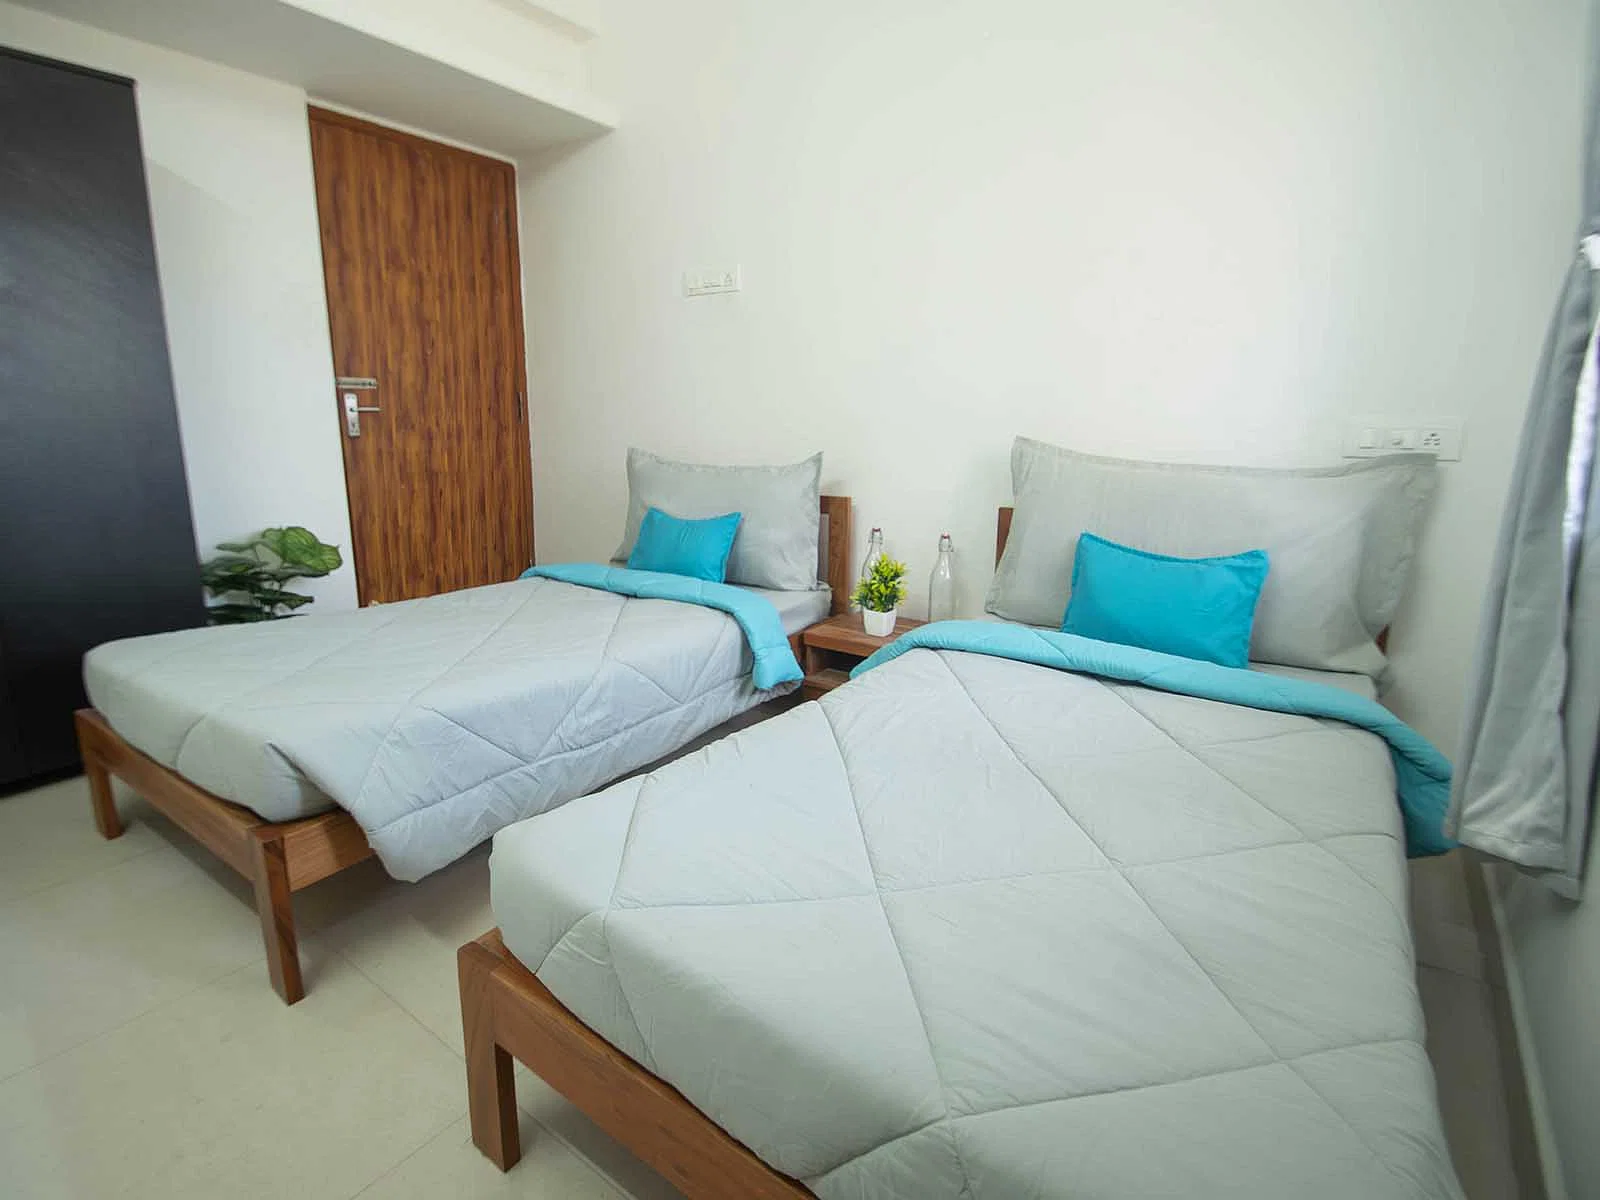 safe and affordable hostels for couple students with 24/7 security and CCTV surveillance-Zolo Dreamtown